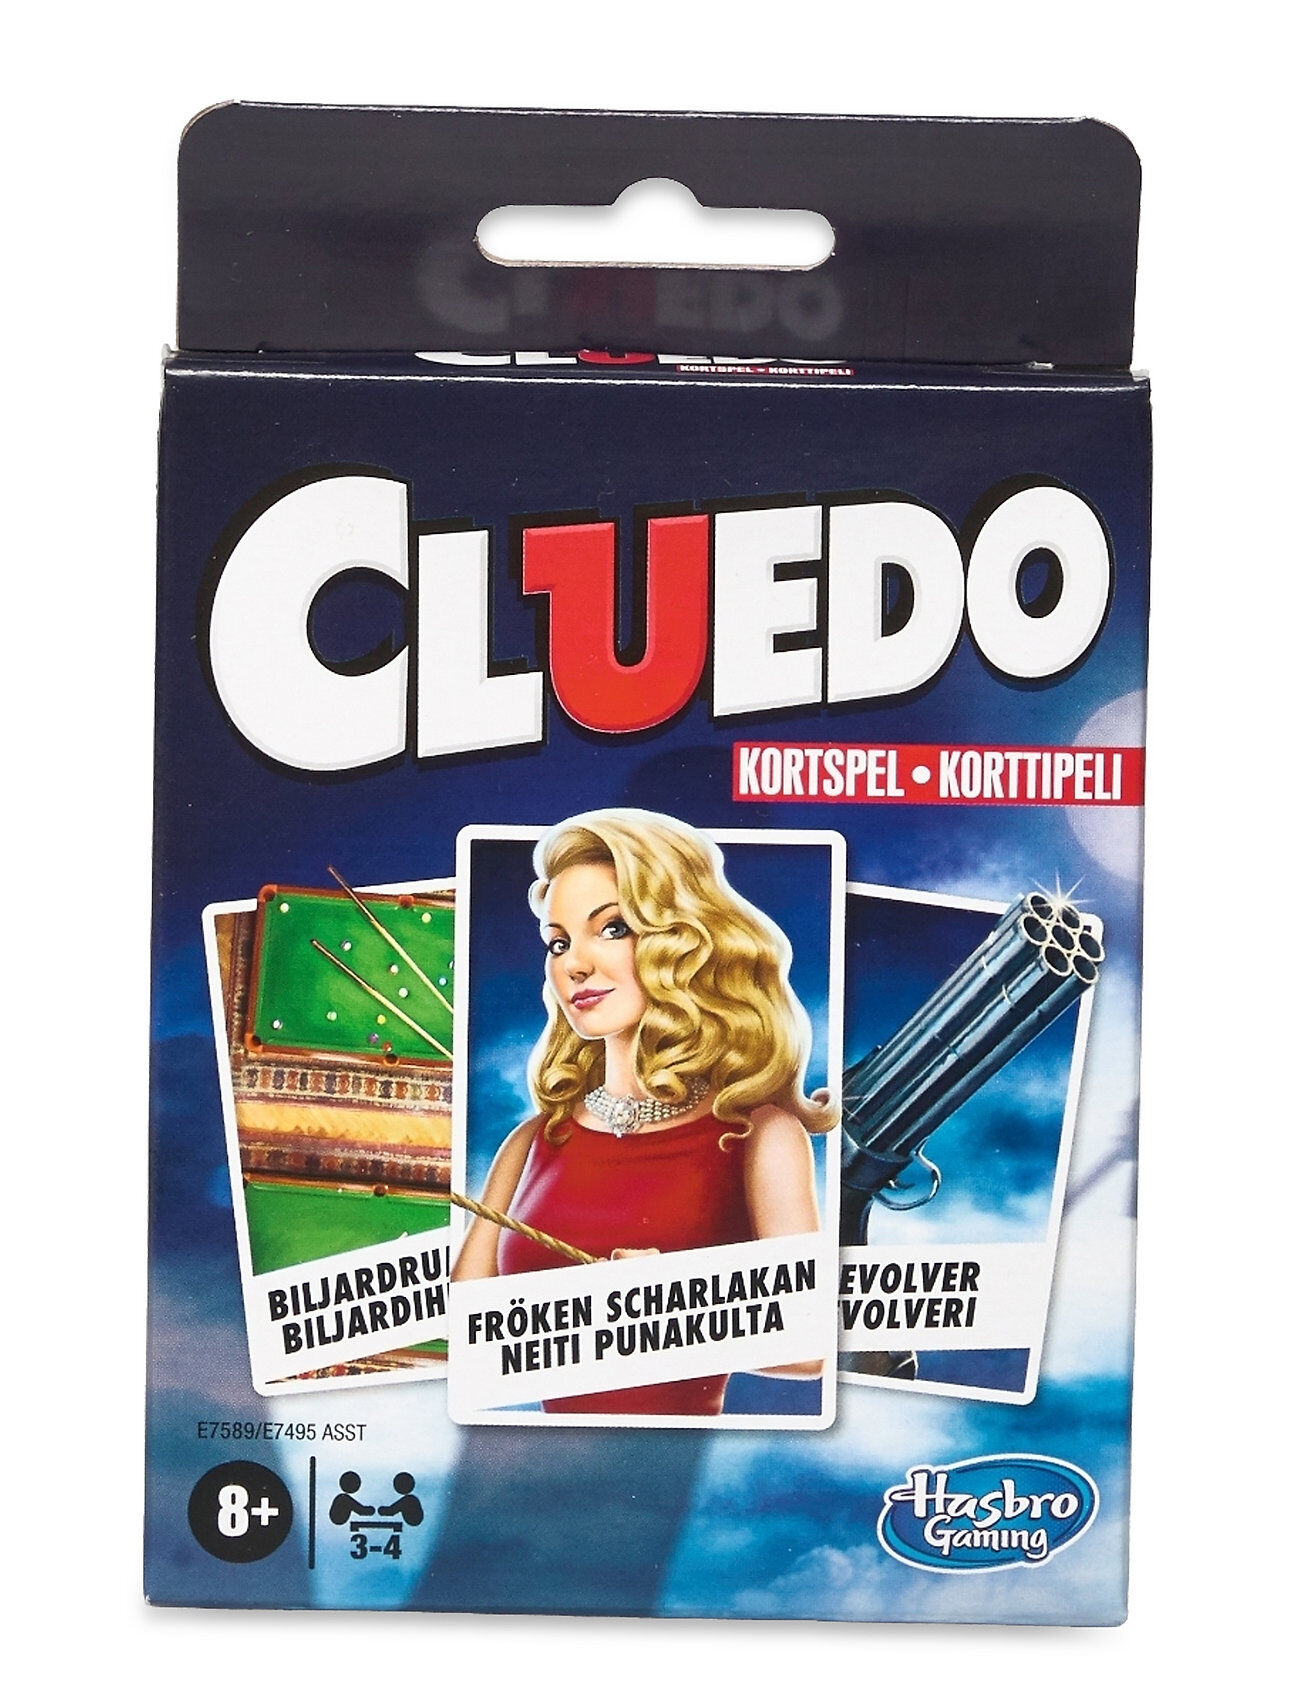 Hasbro Classic Card Game Clue Toys Puzzles And Games Games Multi/mønstret Hasbro Gaming